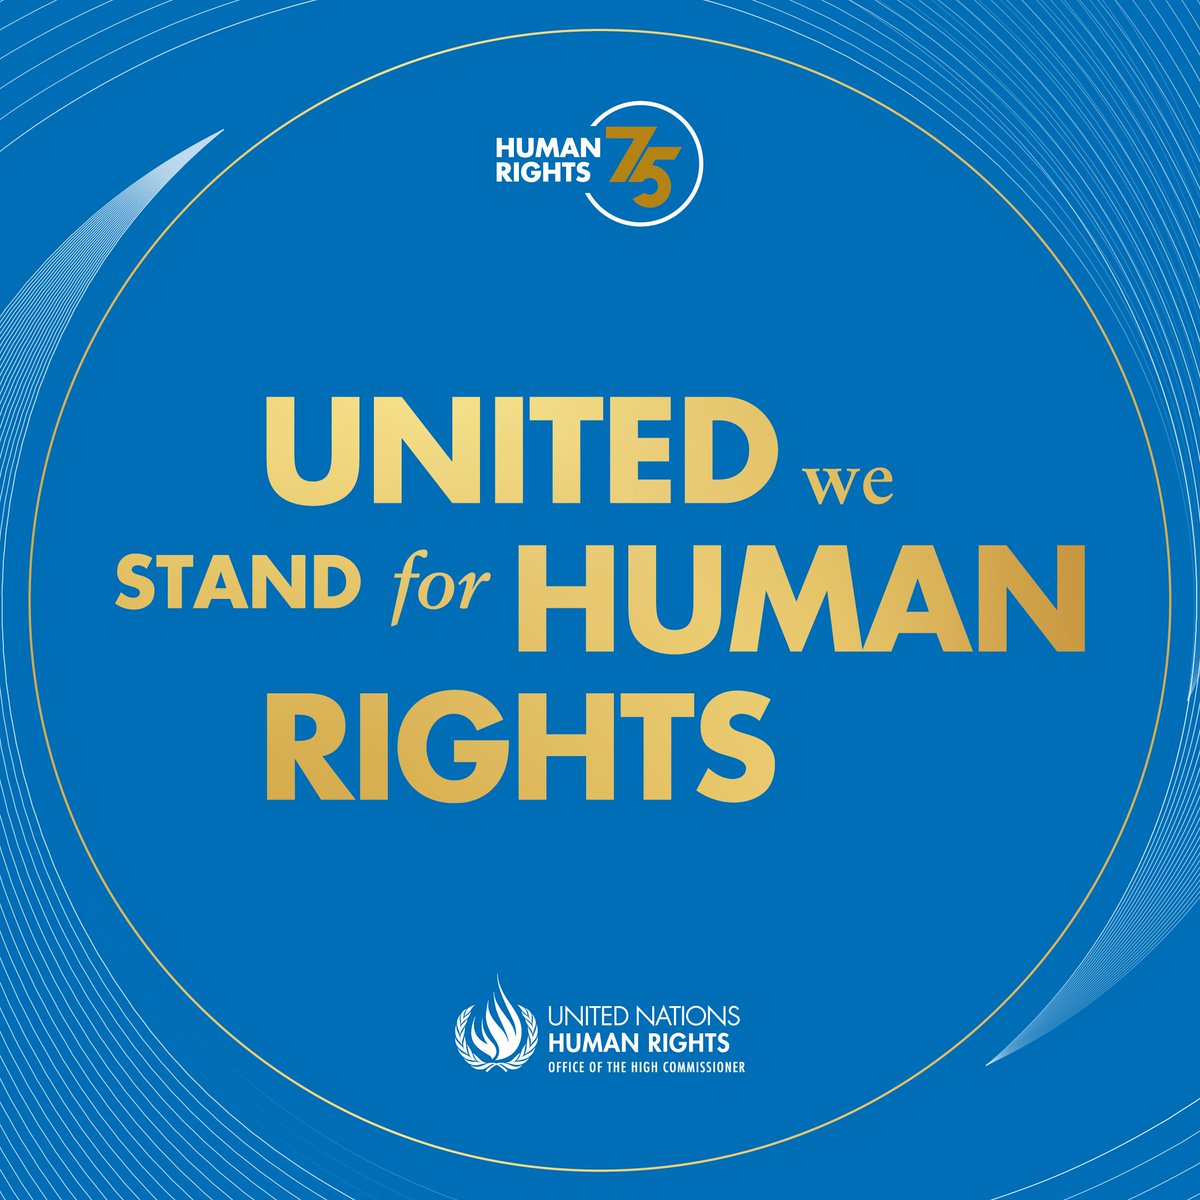 Every step towards equality brings us closer to a world where all rights are respected

#HumanRightsDefenders Declaration's 25th anniv & UDHR's 75th remind us that we must support the crucial work of defenders who often risk their safety for our shared future

#Right2DefendRights